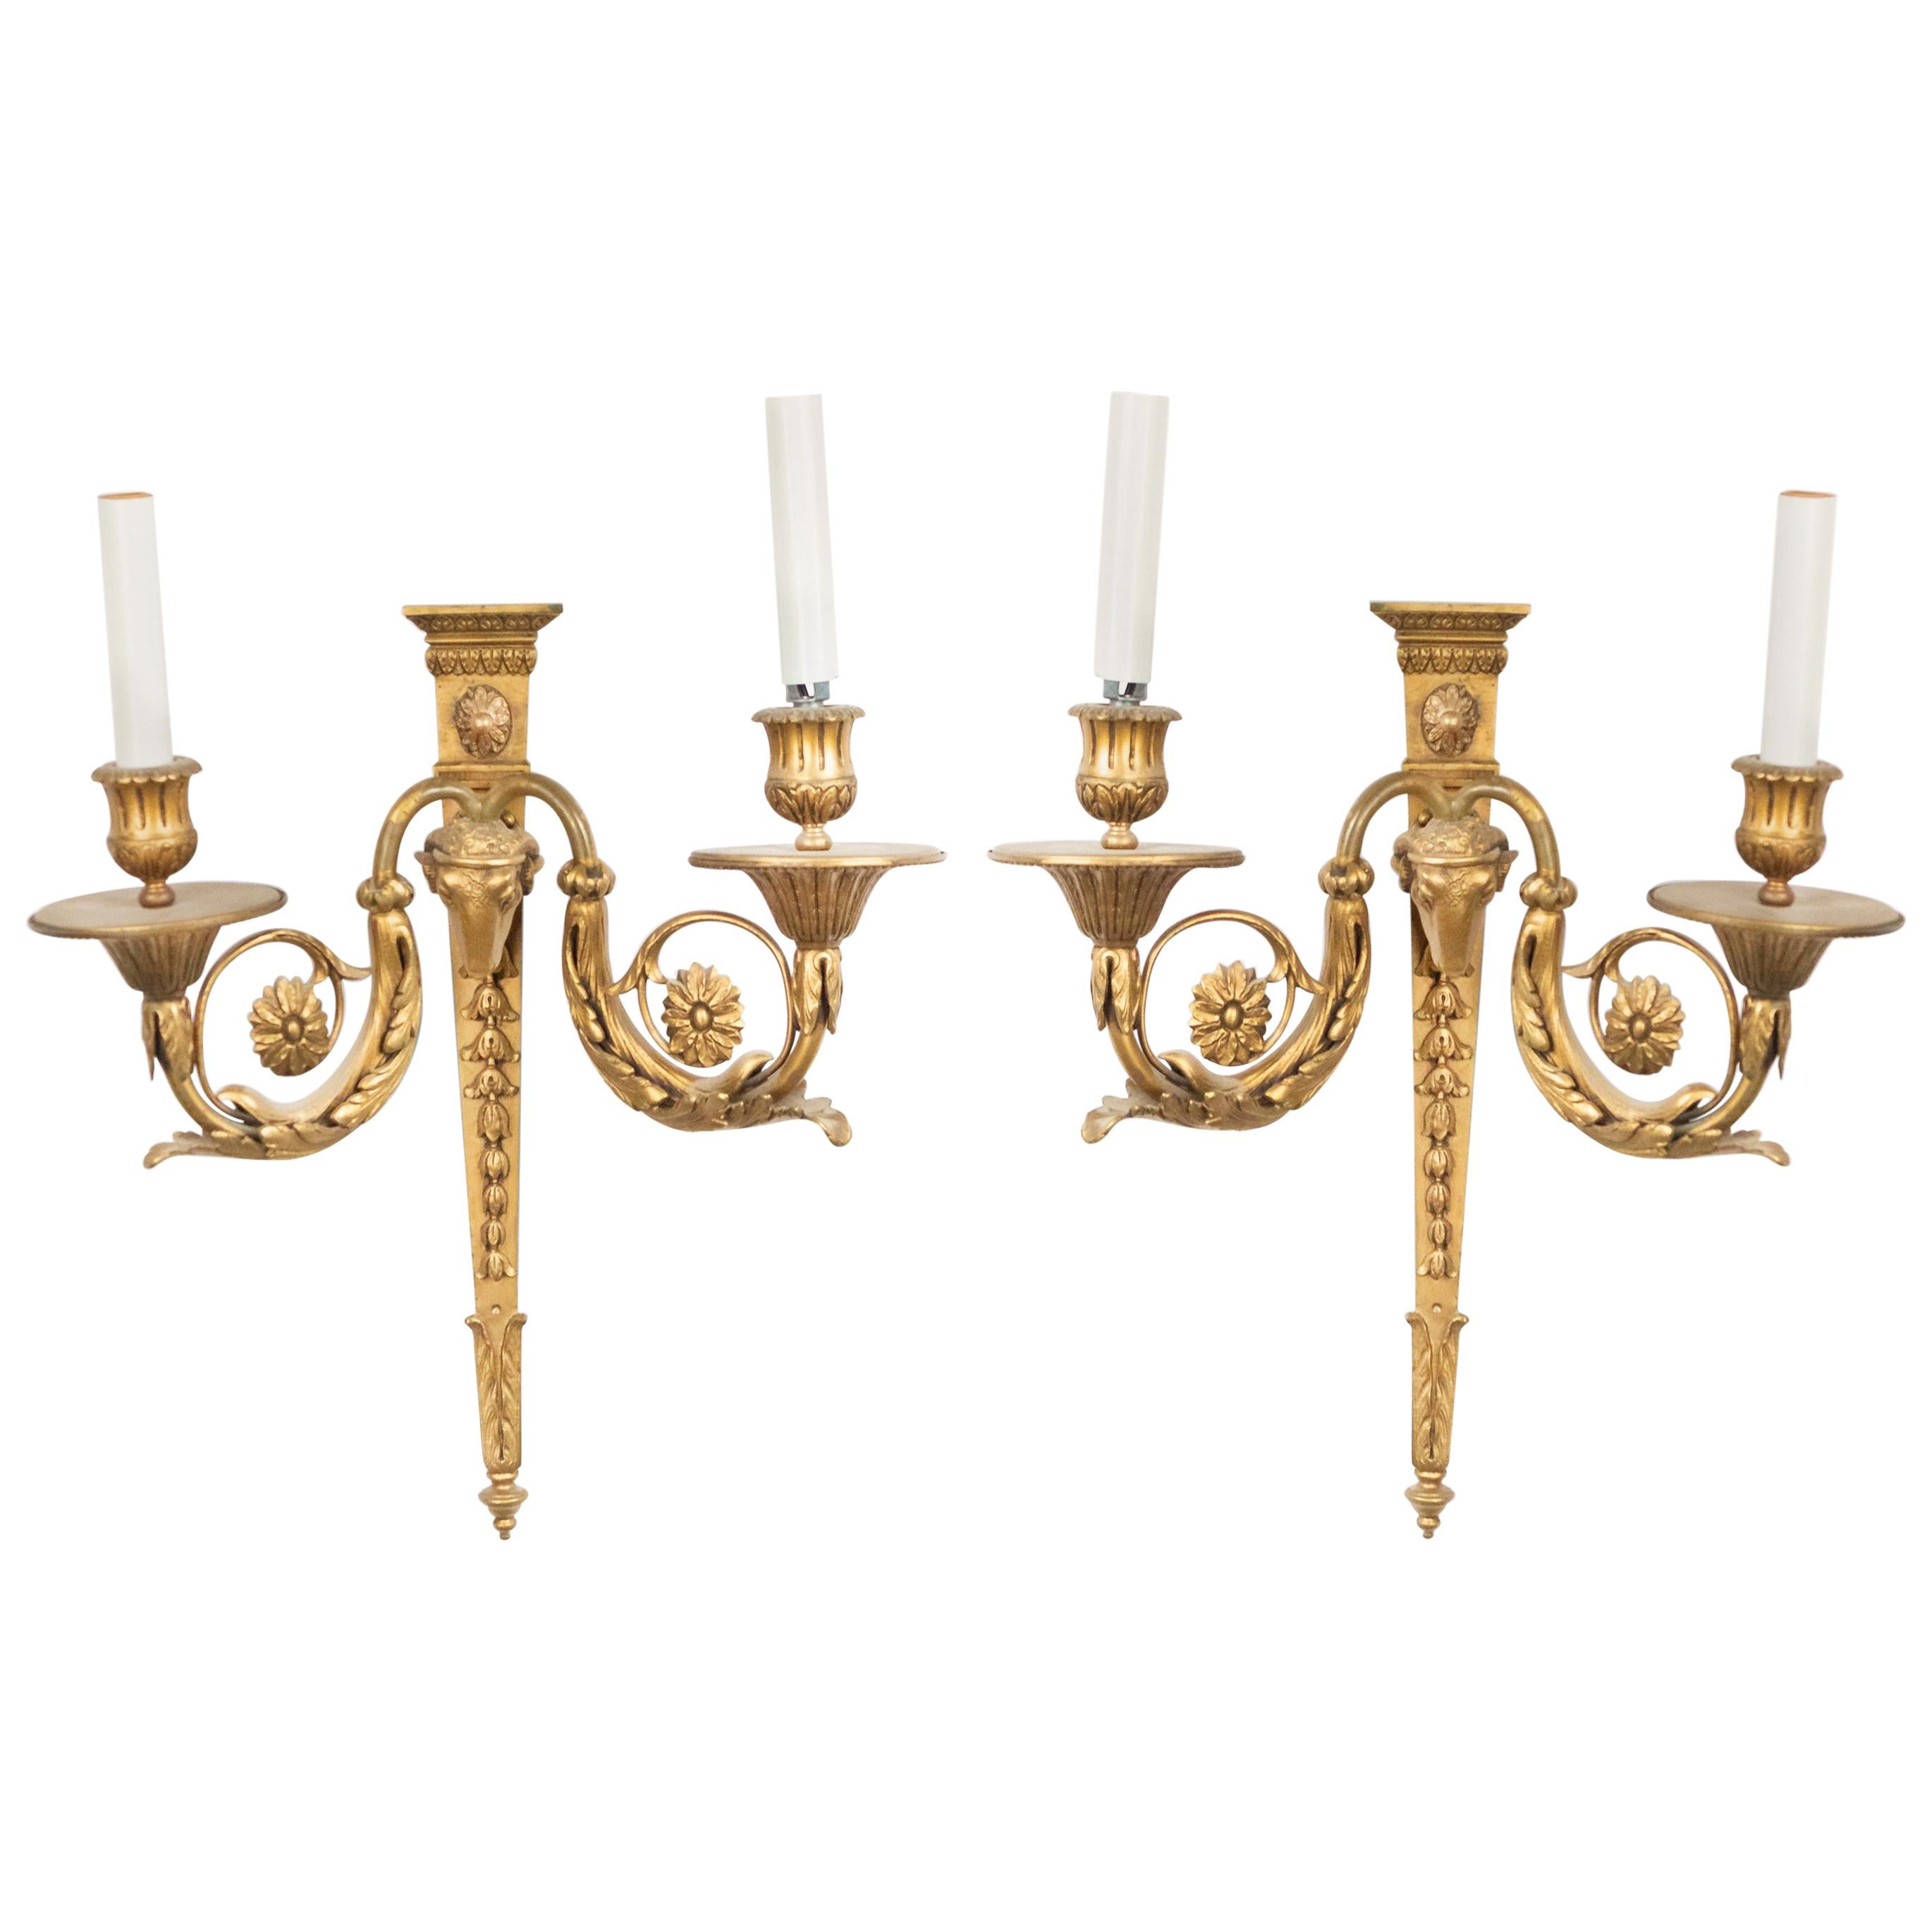 Pair of English Adam Style Bronze Dore Wall Sconces